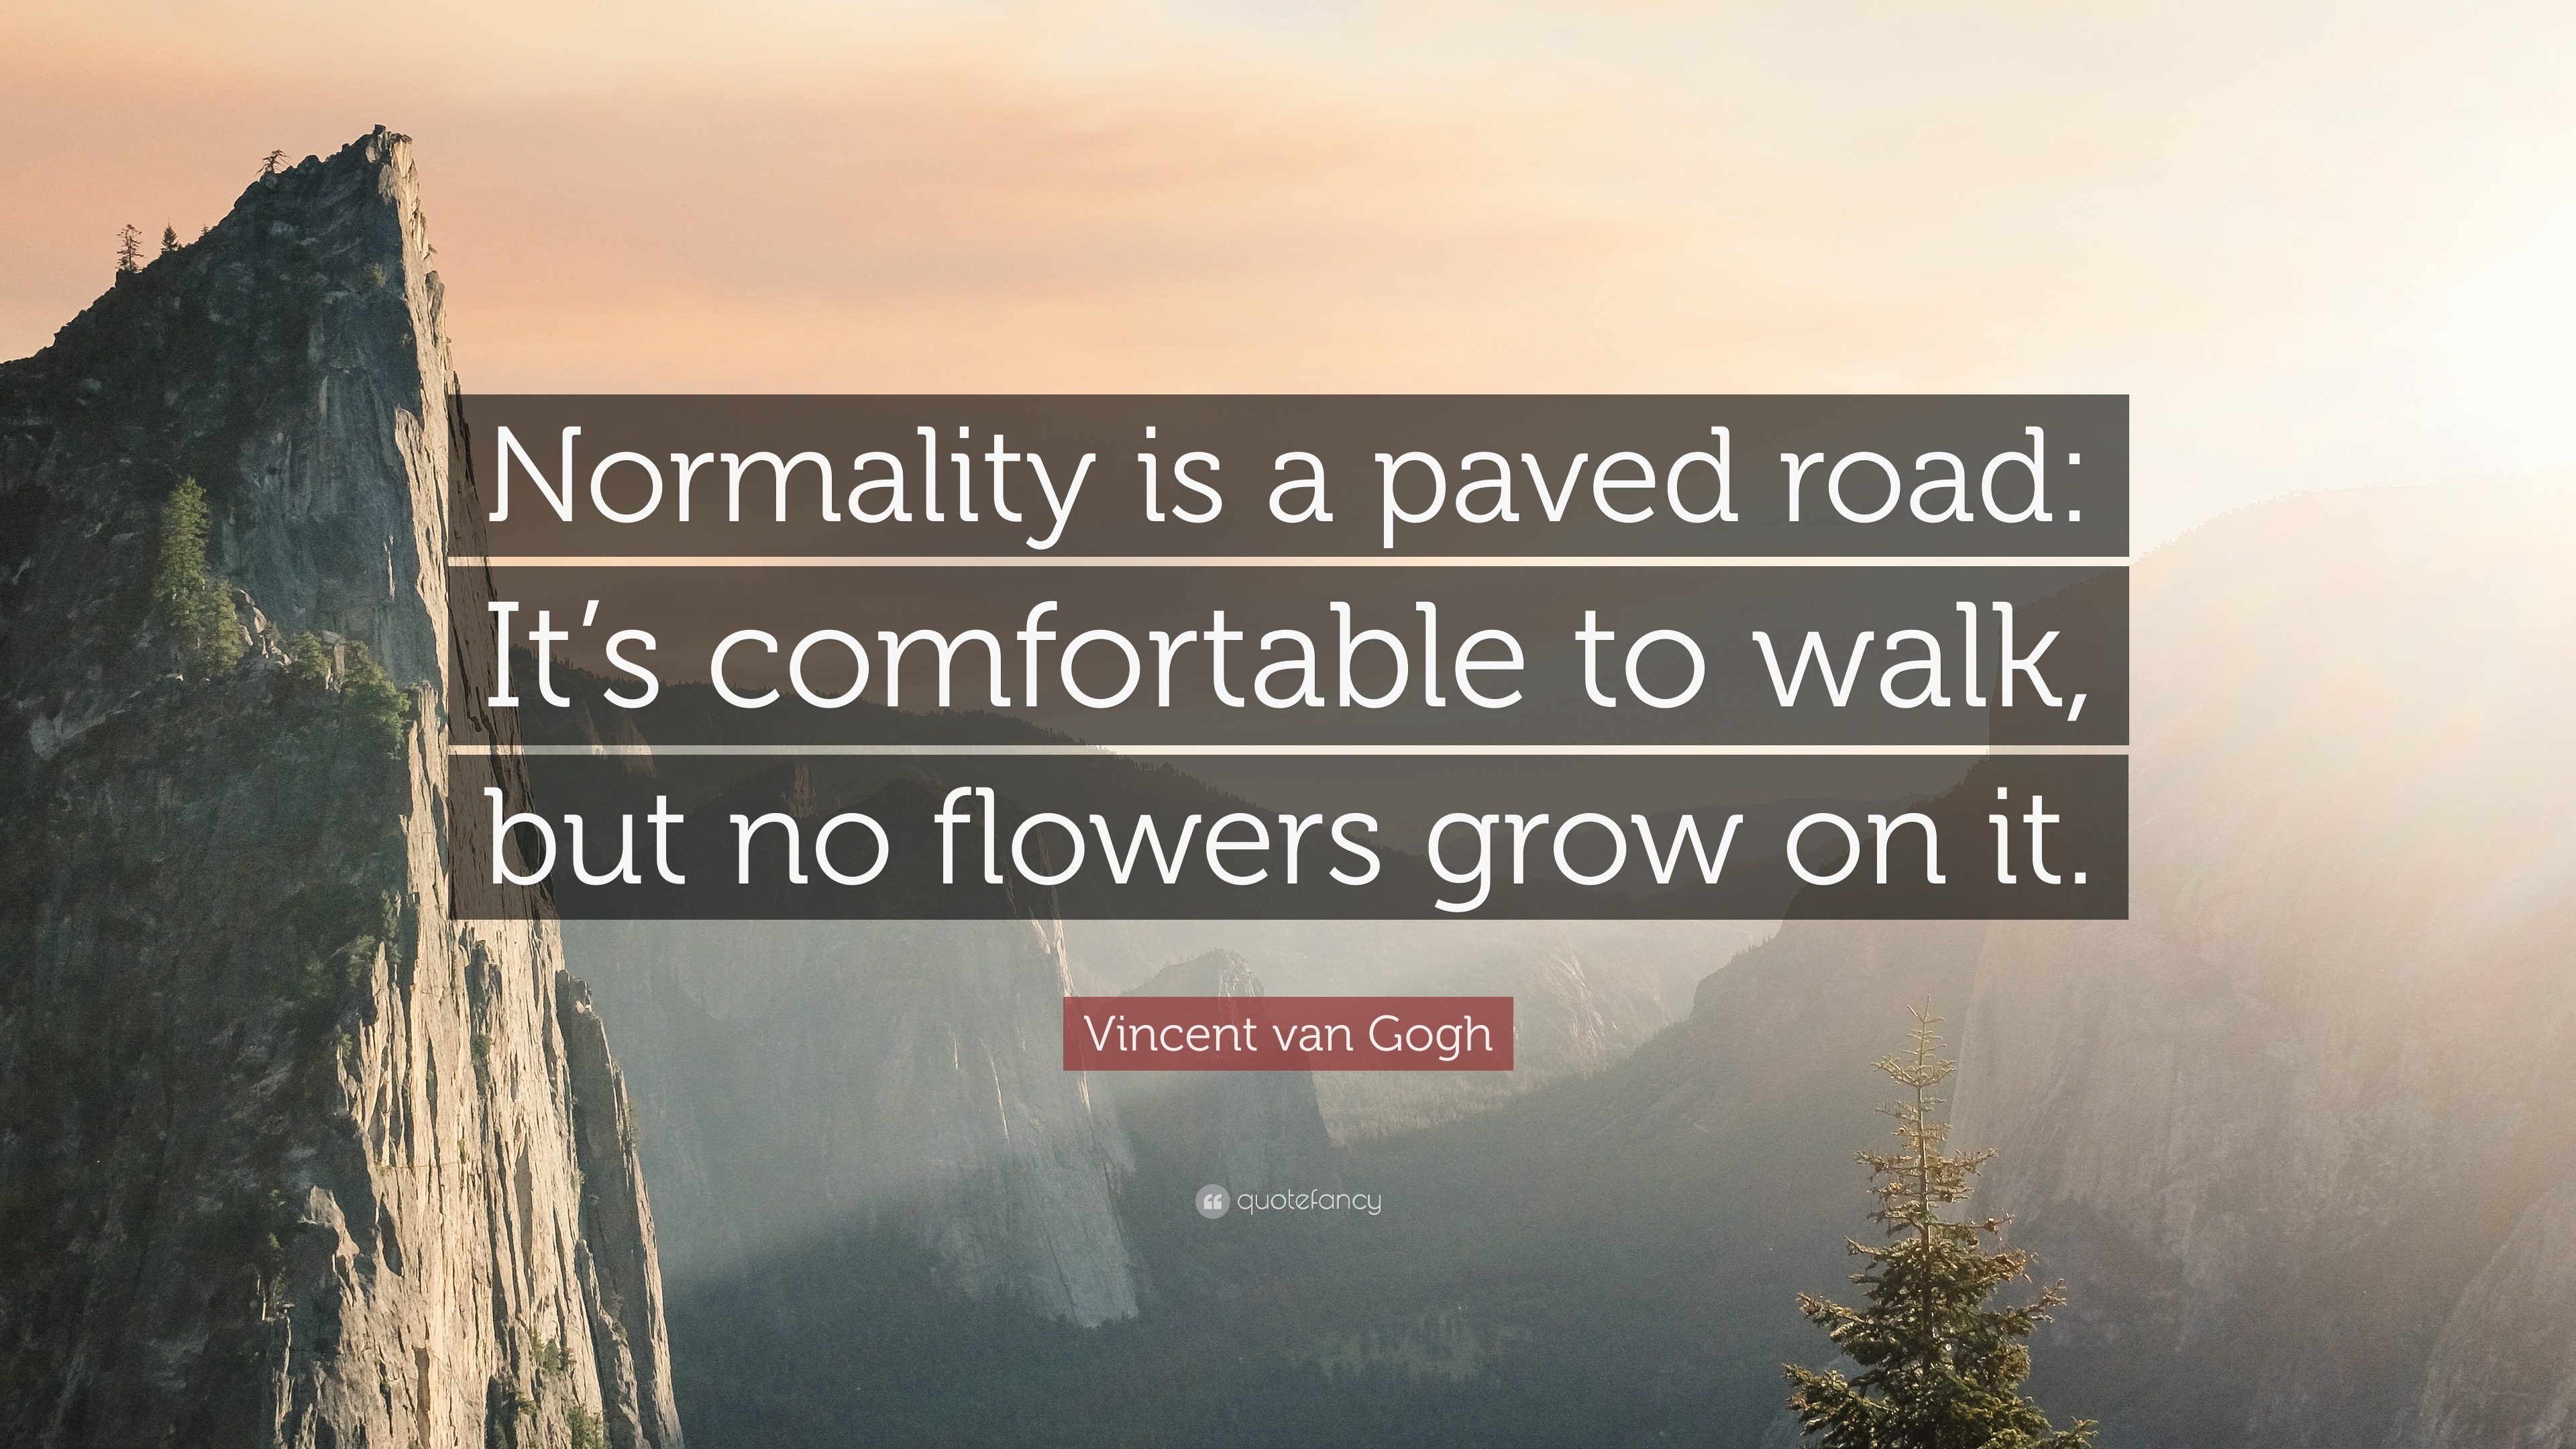 Vincent van Gogh Quote: “Normality is a paved road: It’s comfortable to